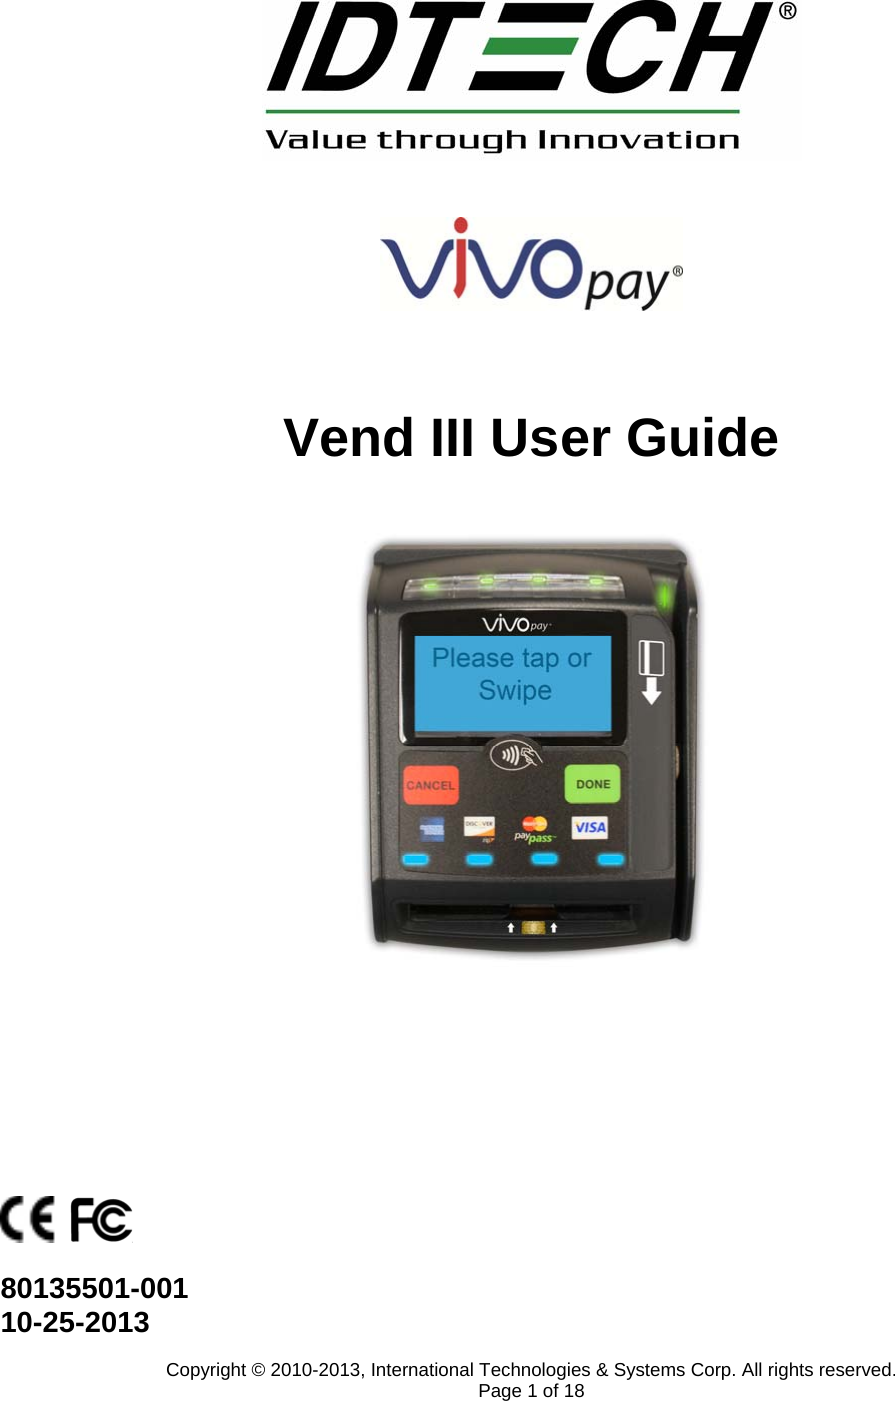       Vend III User Guide                   80135501-001 10-25-2013 Copyright © 2010-2013, International Technologies &amp; Systems Corp. All rights reserved. Page 1 of 18 